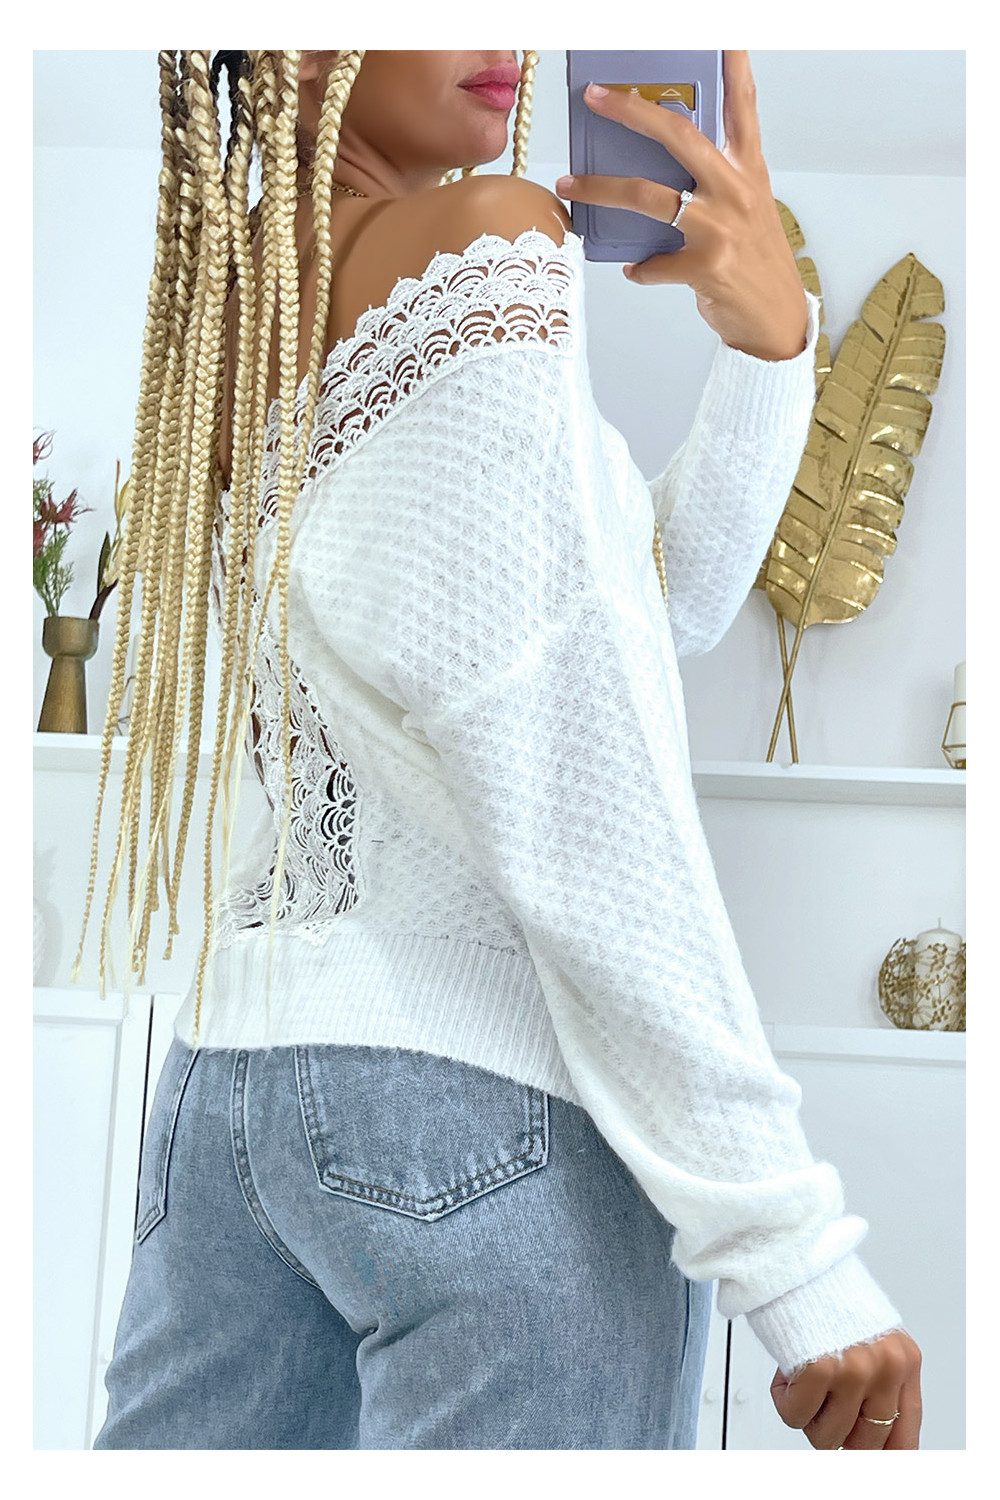 Museum JEP Overvloedig Lightweight white sweater with round neck and open back lace